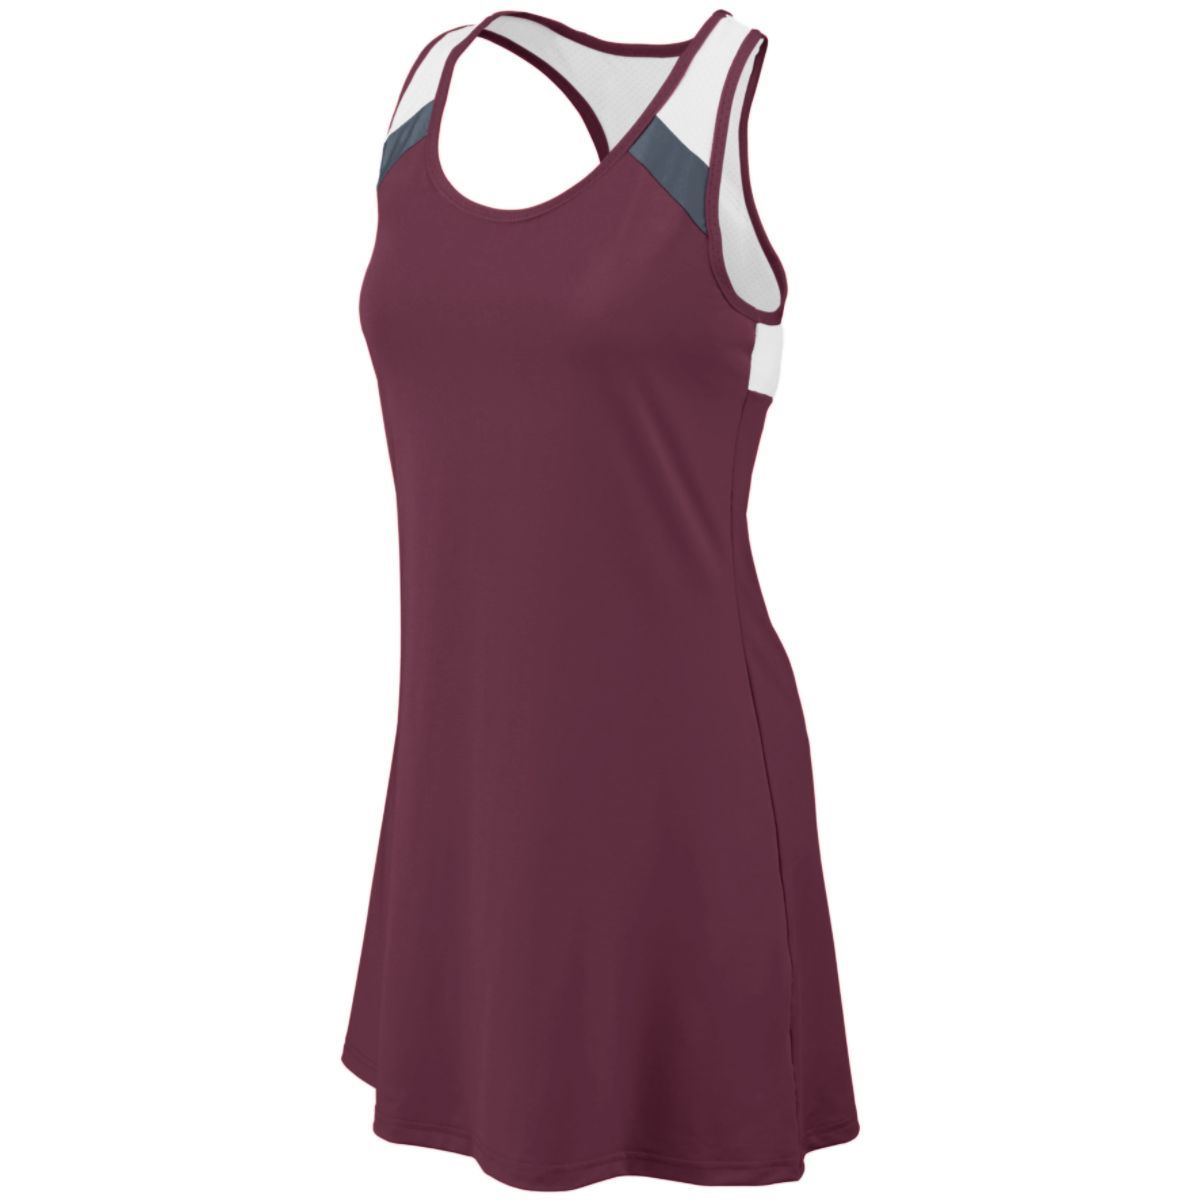 Augusta Sportswear Deuce Dress in Dark Maroon/Graphite/White  -Part of the Ladies, Augusta-Products, Tennis, Shirts product lines at KanaleyCreations.com